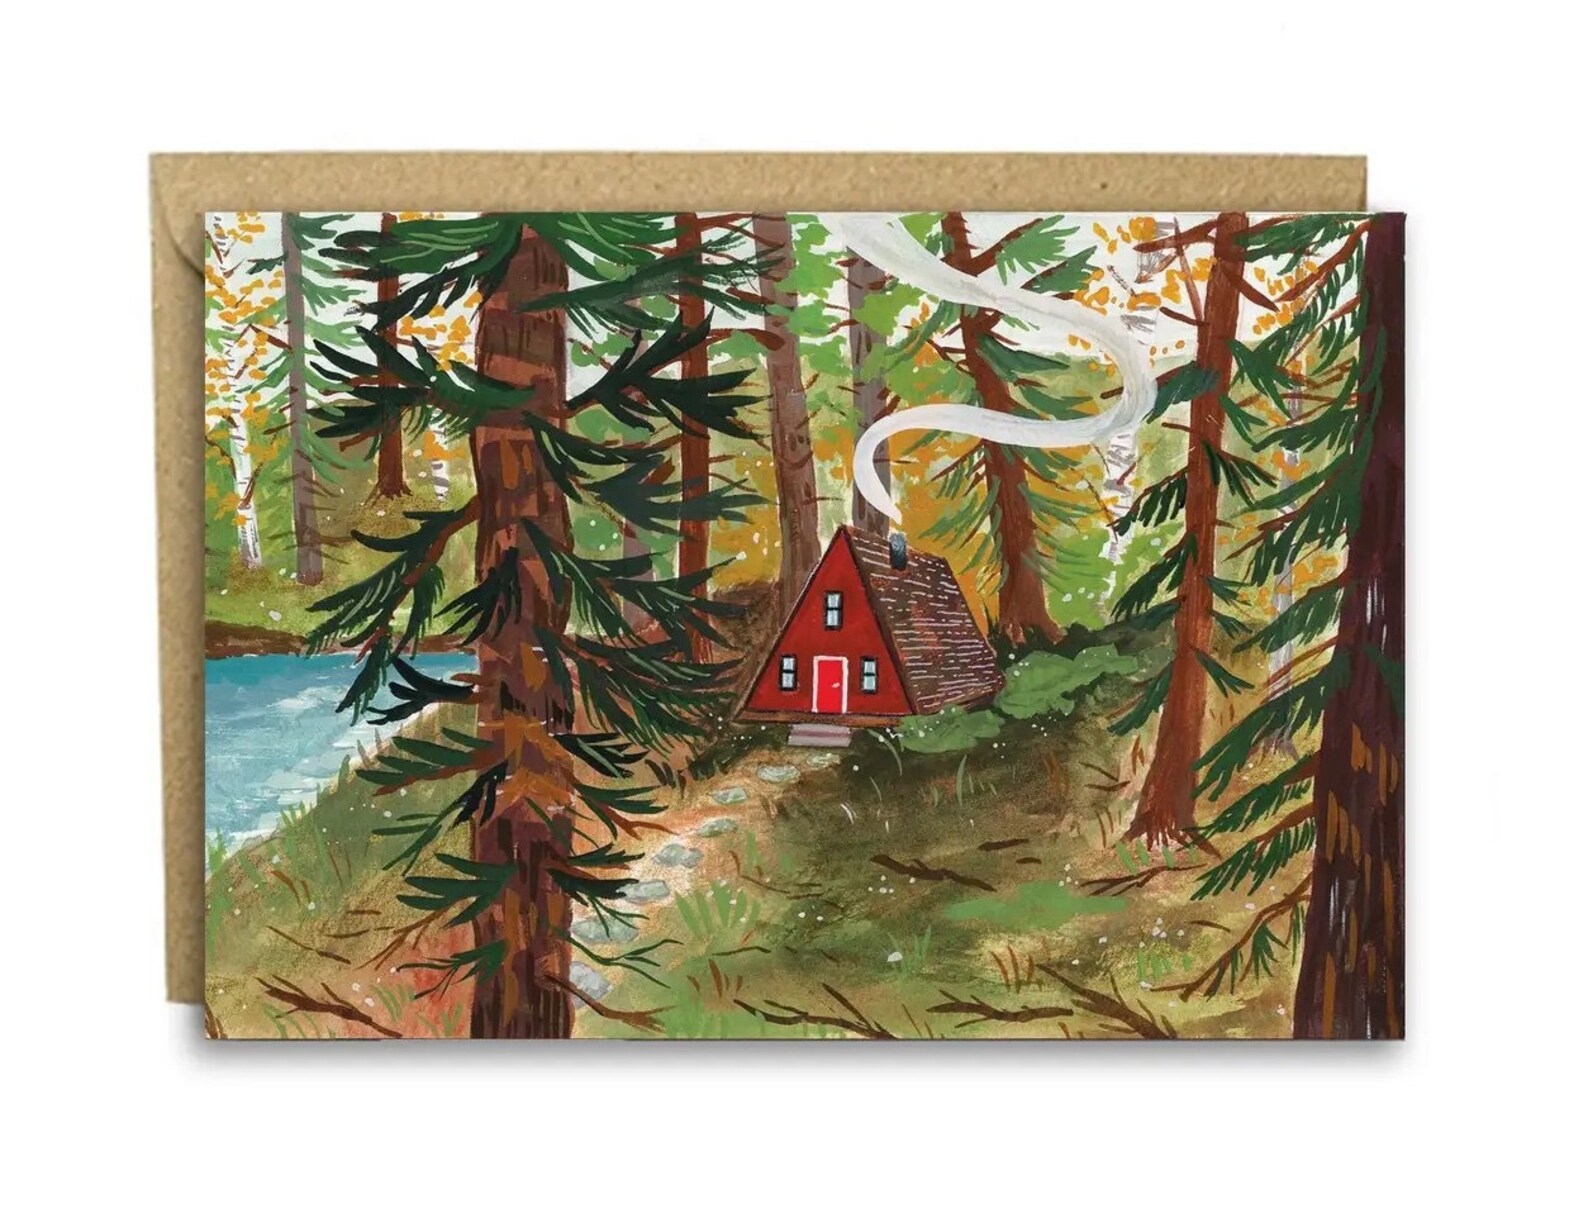 A-Frame Cabin in the Woods Card | Greeting Card | Blank Cards | Adventure Card | Illustration Card | Cabin Forest Card | Charis Raine